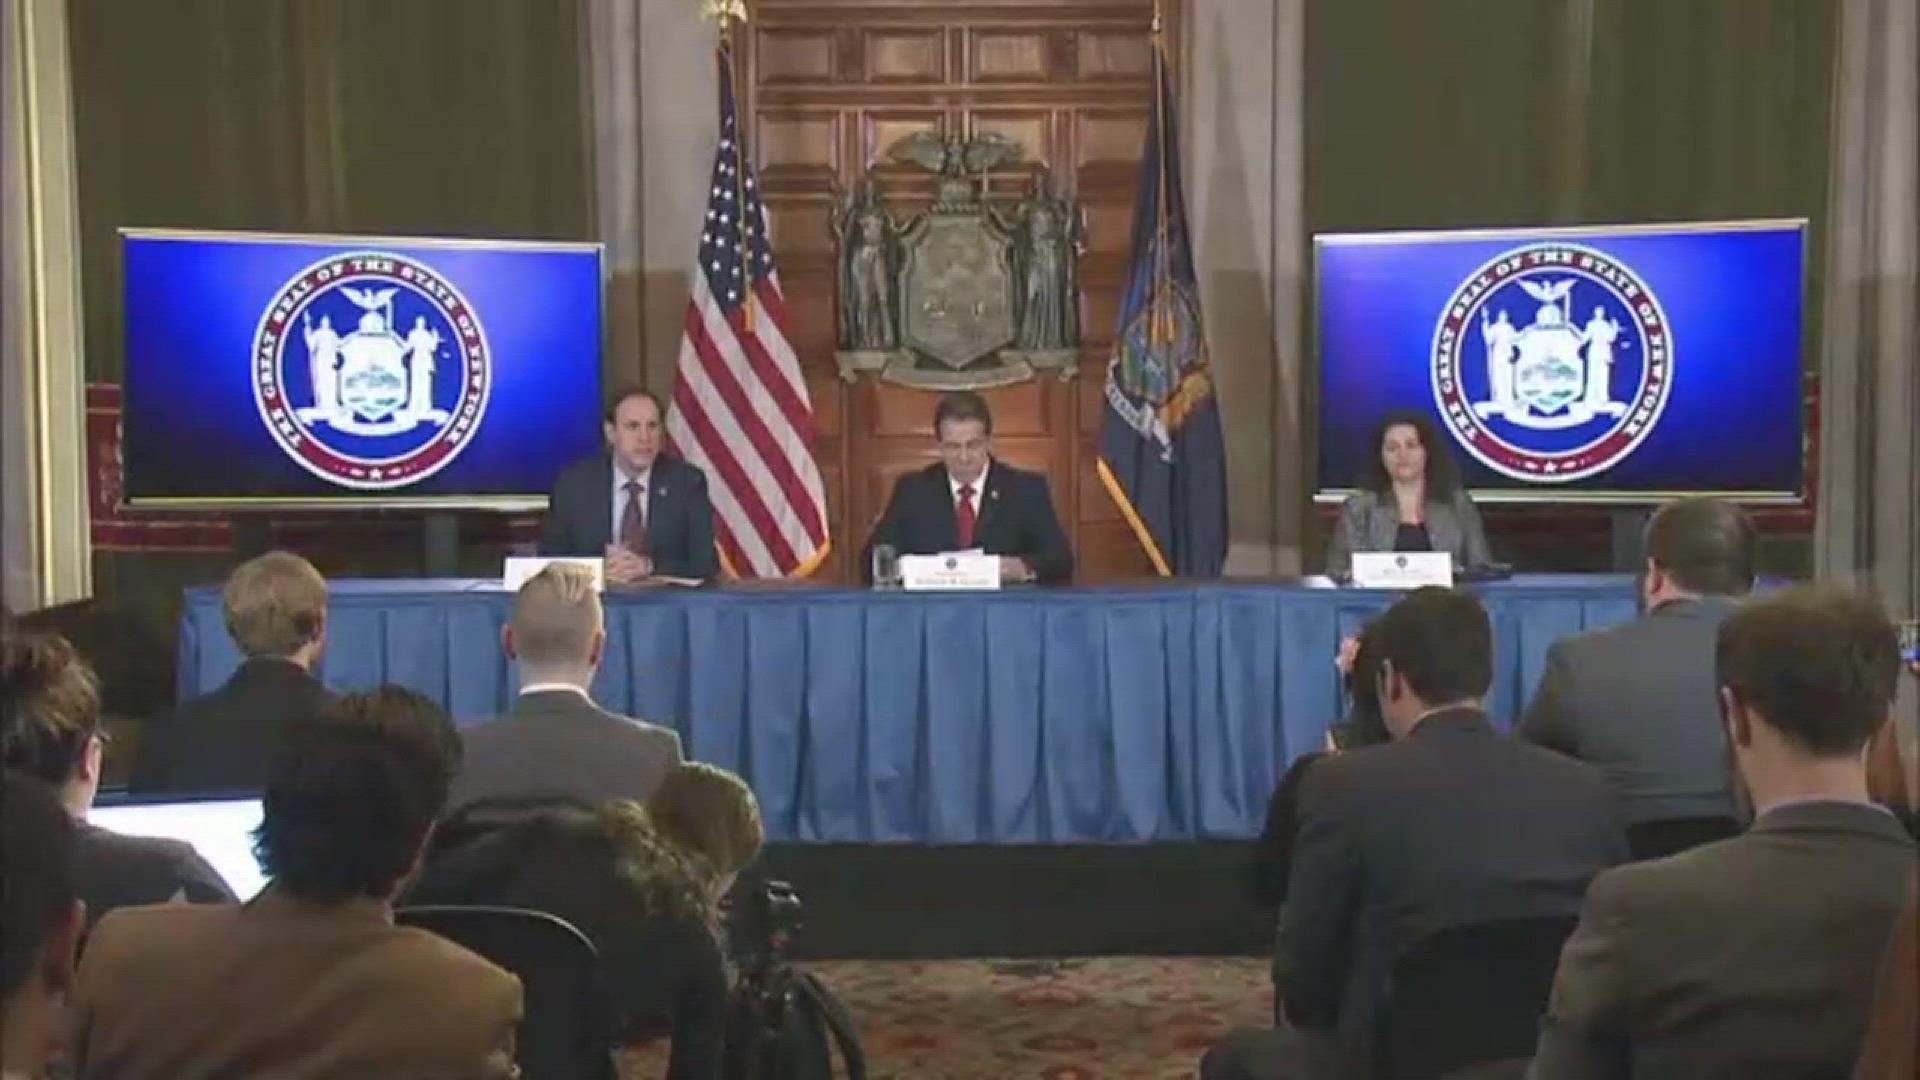 Governor Cuomo says 5 more people confirmed with coronavirus in NYS